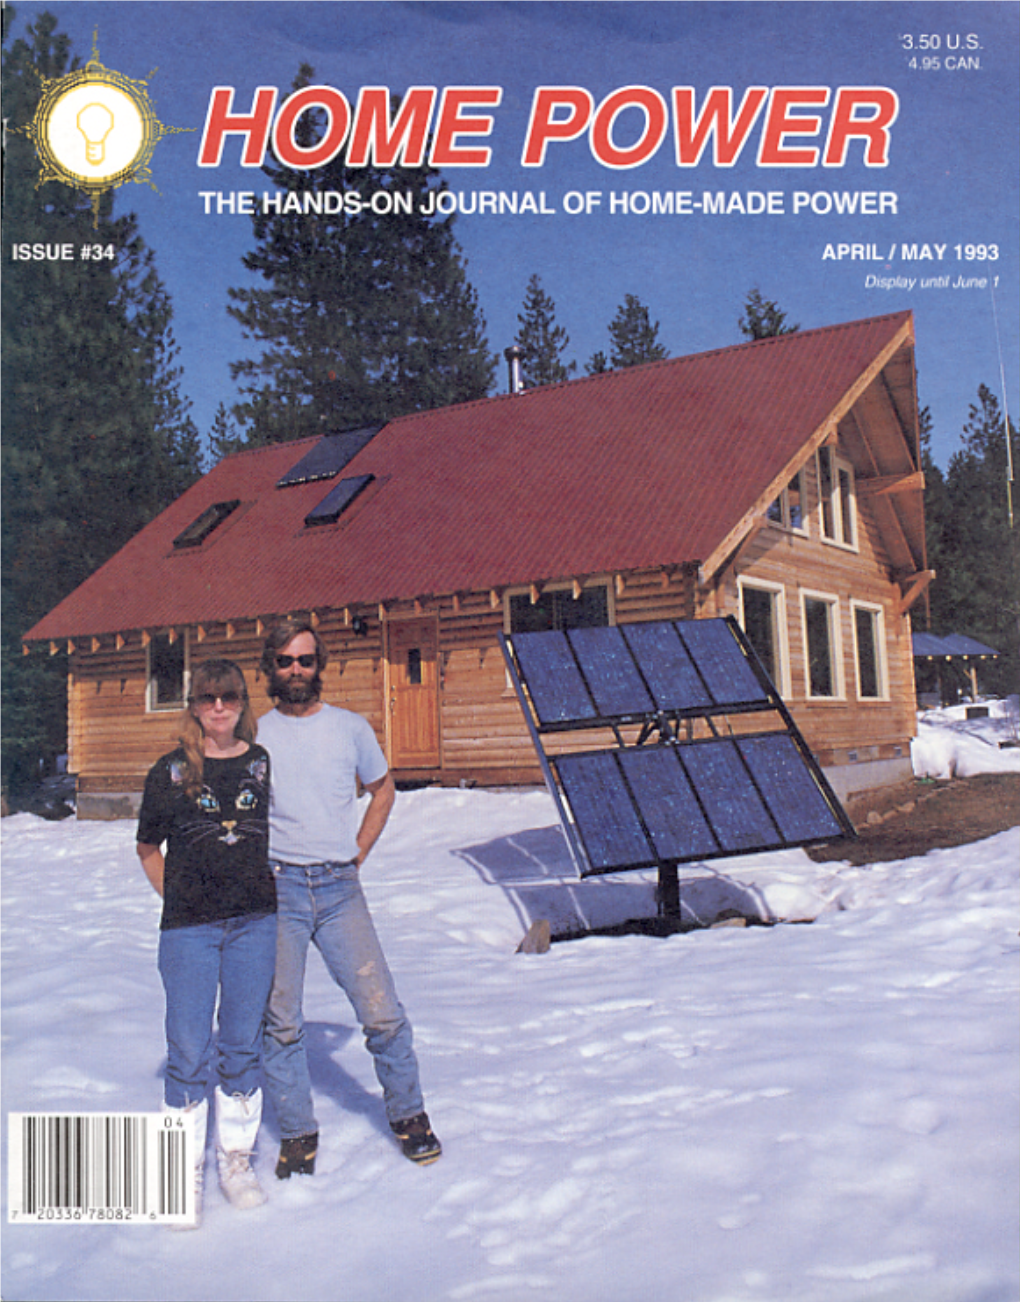 Home Power #34 ¥ April / May 1993 HOME POWER